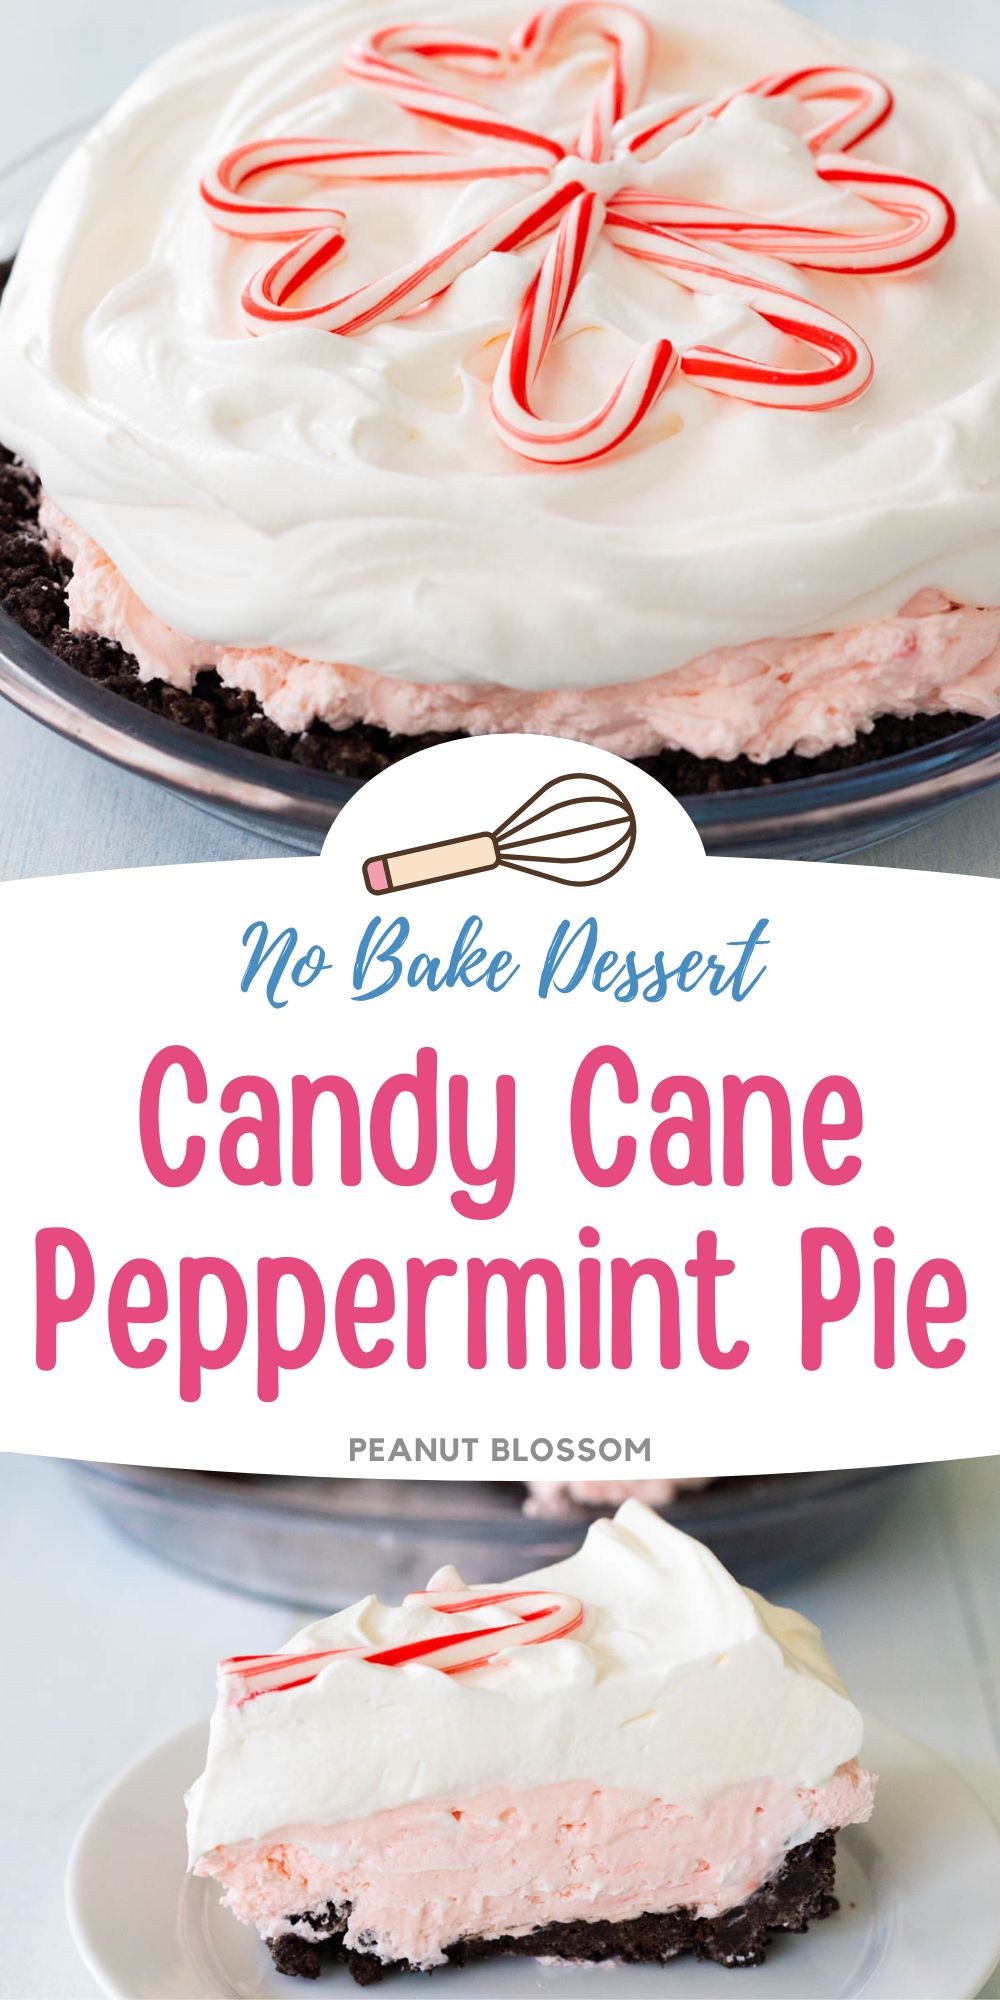 The photo collage shows the candy cane pie decorated with mini candy canes on top next to a photo of a slice of the pie so you can see the pink peppermint cream filling on top of the chocolate Oreo cookie crust.